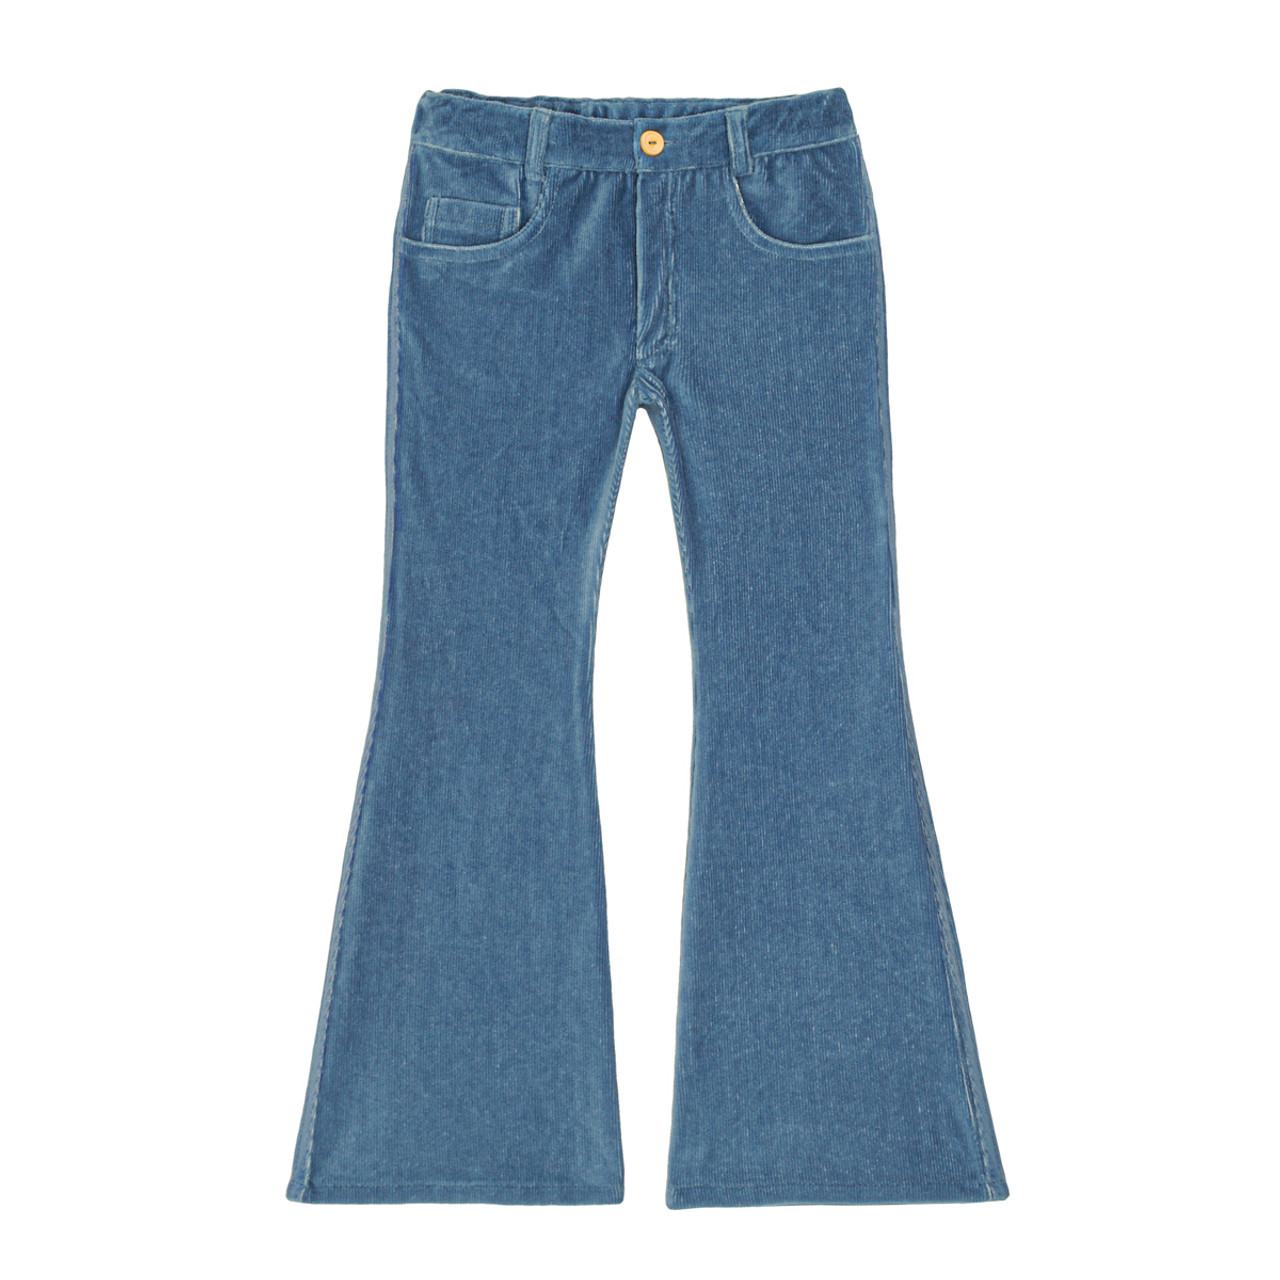 Shop Elle Kids Girls Blue Solid Trouser | ICONIC INDIA – Iconic India